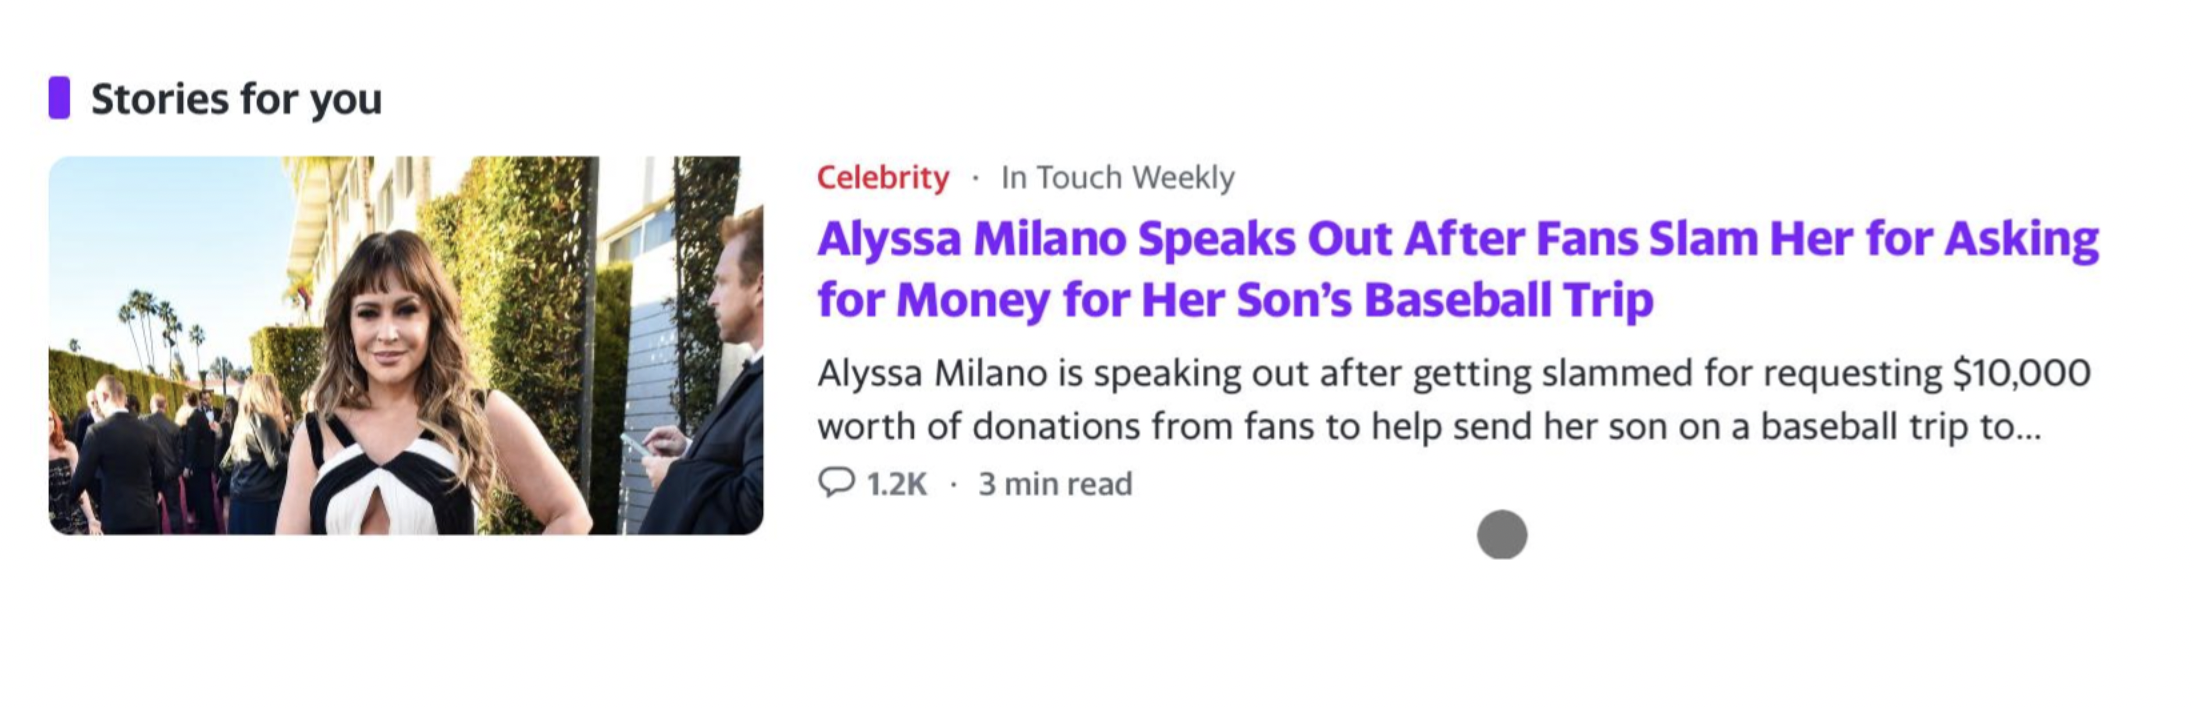 leisure - Stories for you Celebrity In Touch Weekly Alyssa Milano Speaks Out After Fans Slam Her for Asking for Money for Her Son's Baseball Trip Alyssa Milano is speaking out after getting slammed for requesting $10,000 worth of donations from fans to he